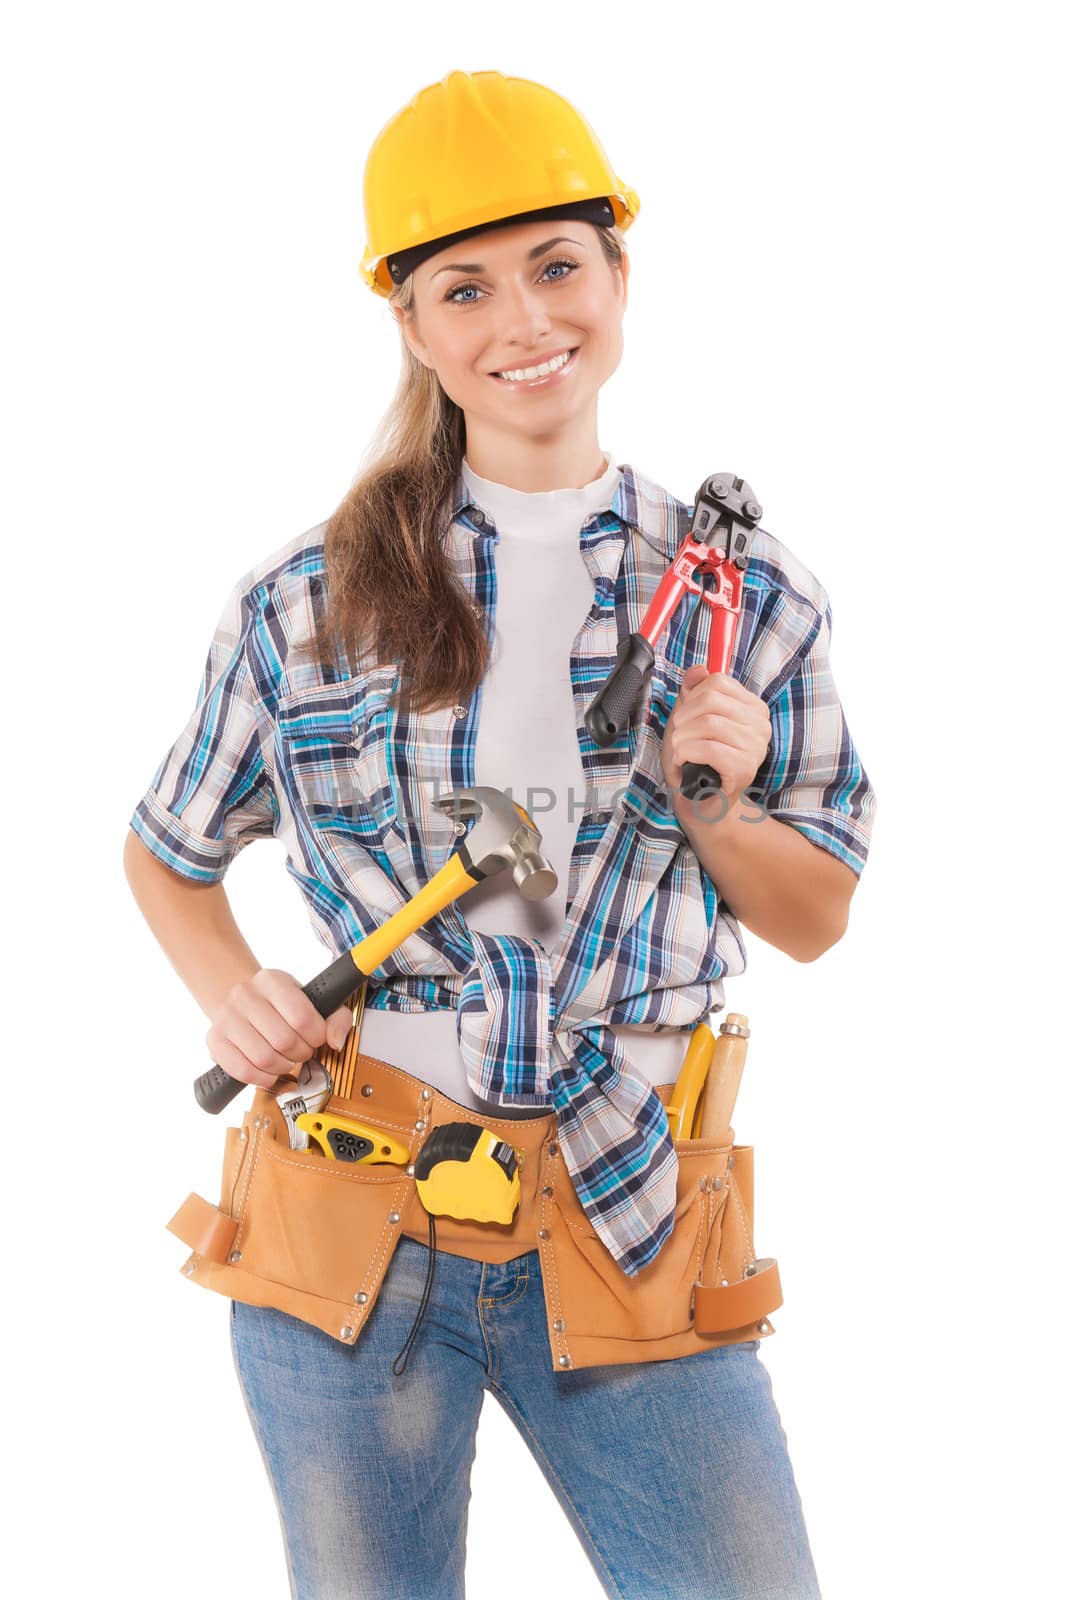 female worker holding tools isolated on white